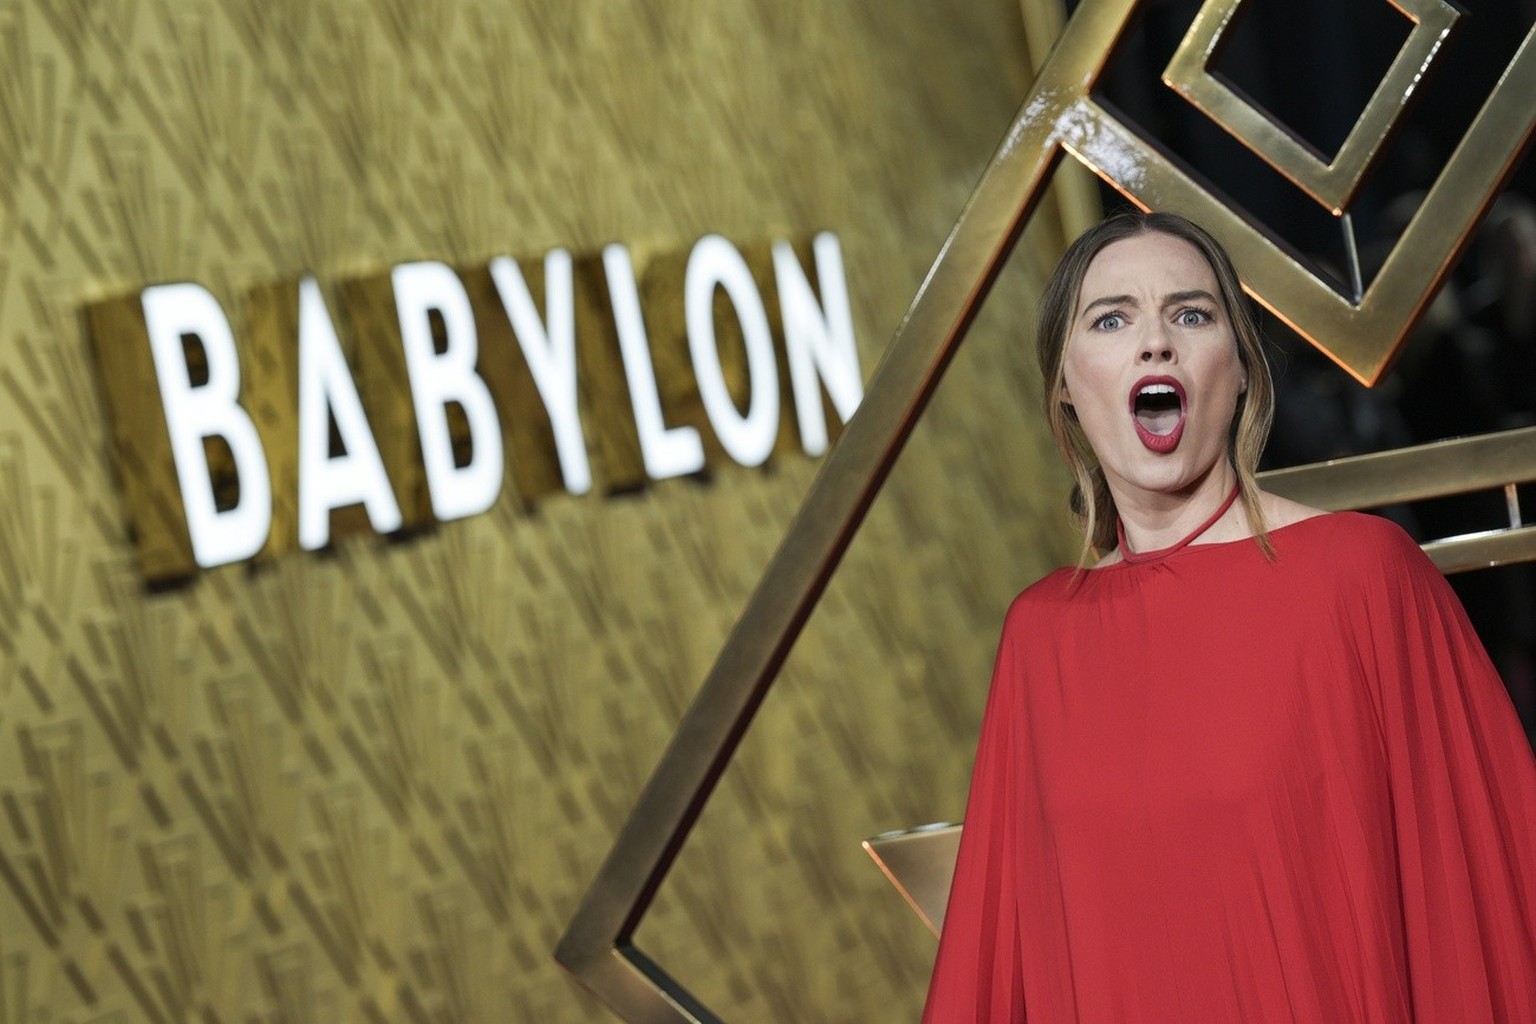 Margot Robbie poses for photographers upon arrival at the premiere of the film &#039;Babylon&#039; in London, Thursday, Jan. 12, 2023. (Photo by Scott Garfitt/Invision/AP)